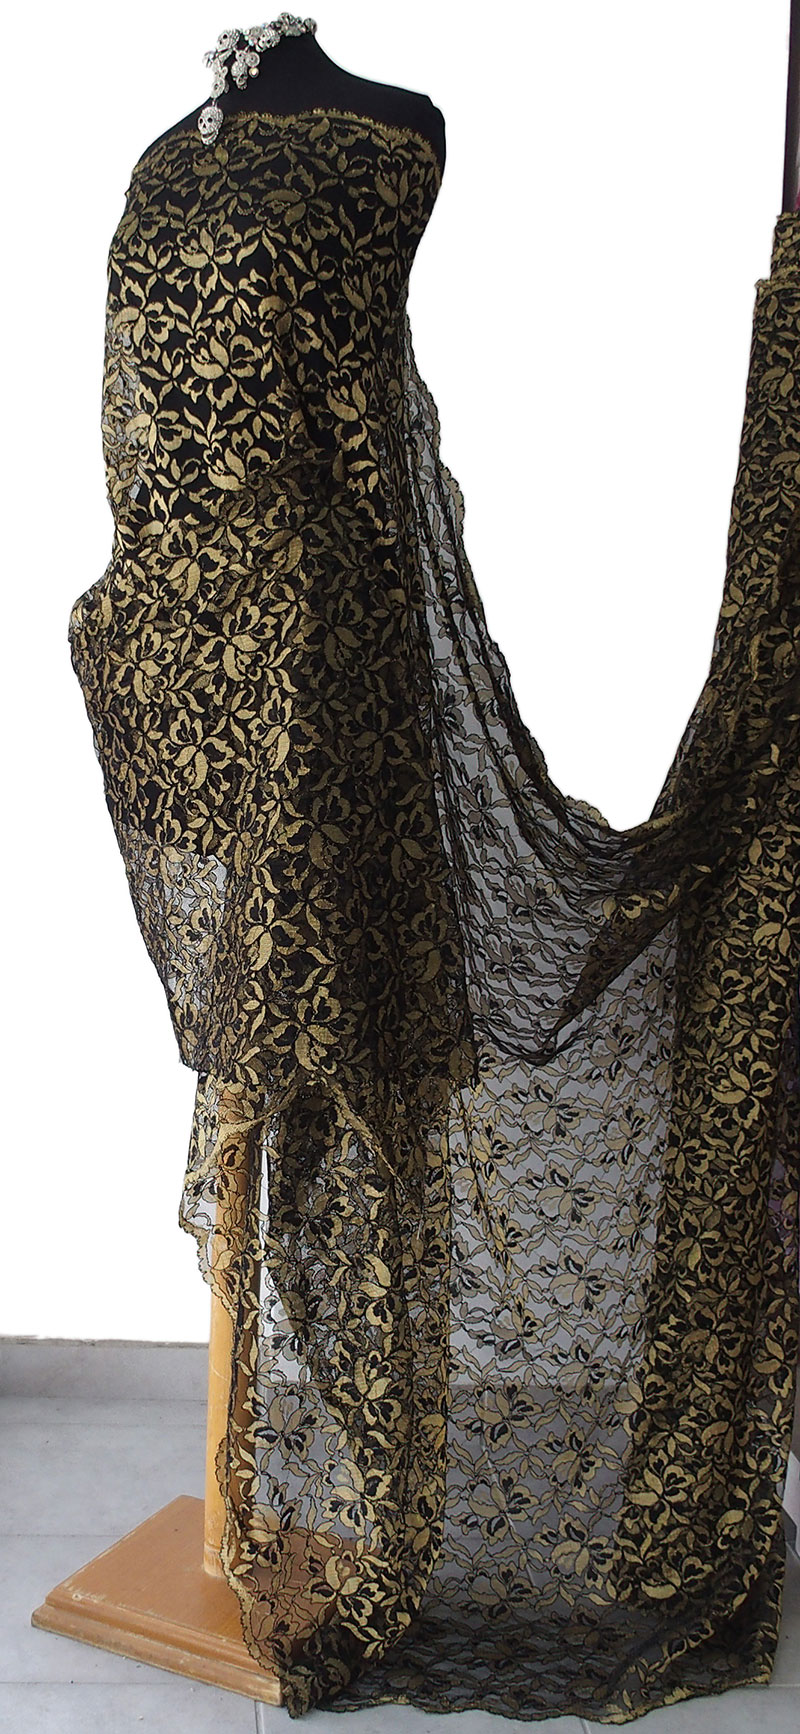 Black and gold lace fabric black lace with golden yellow floral